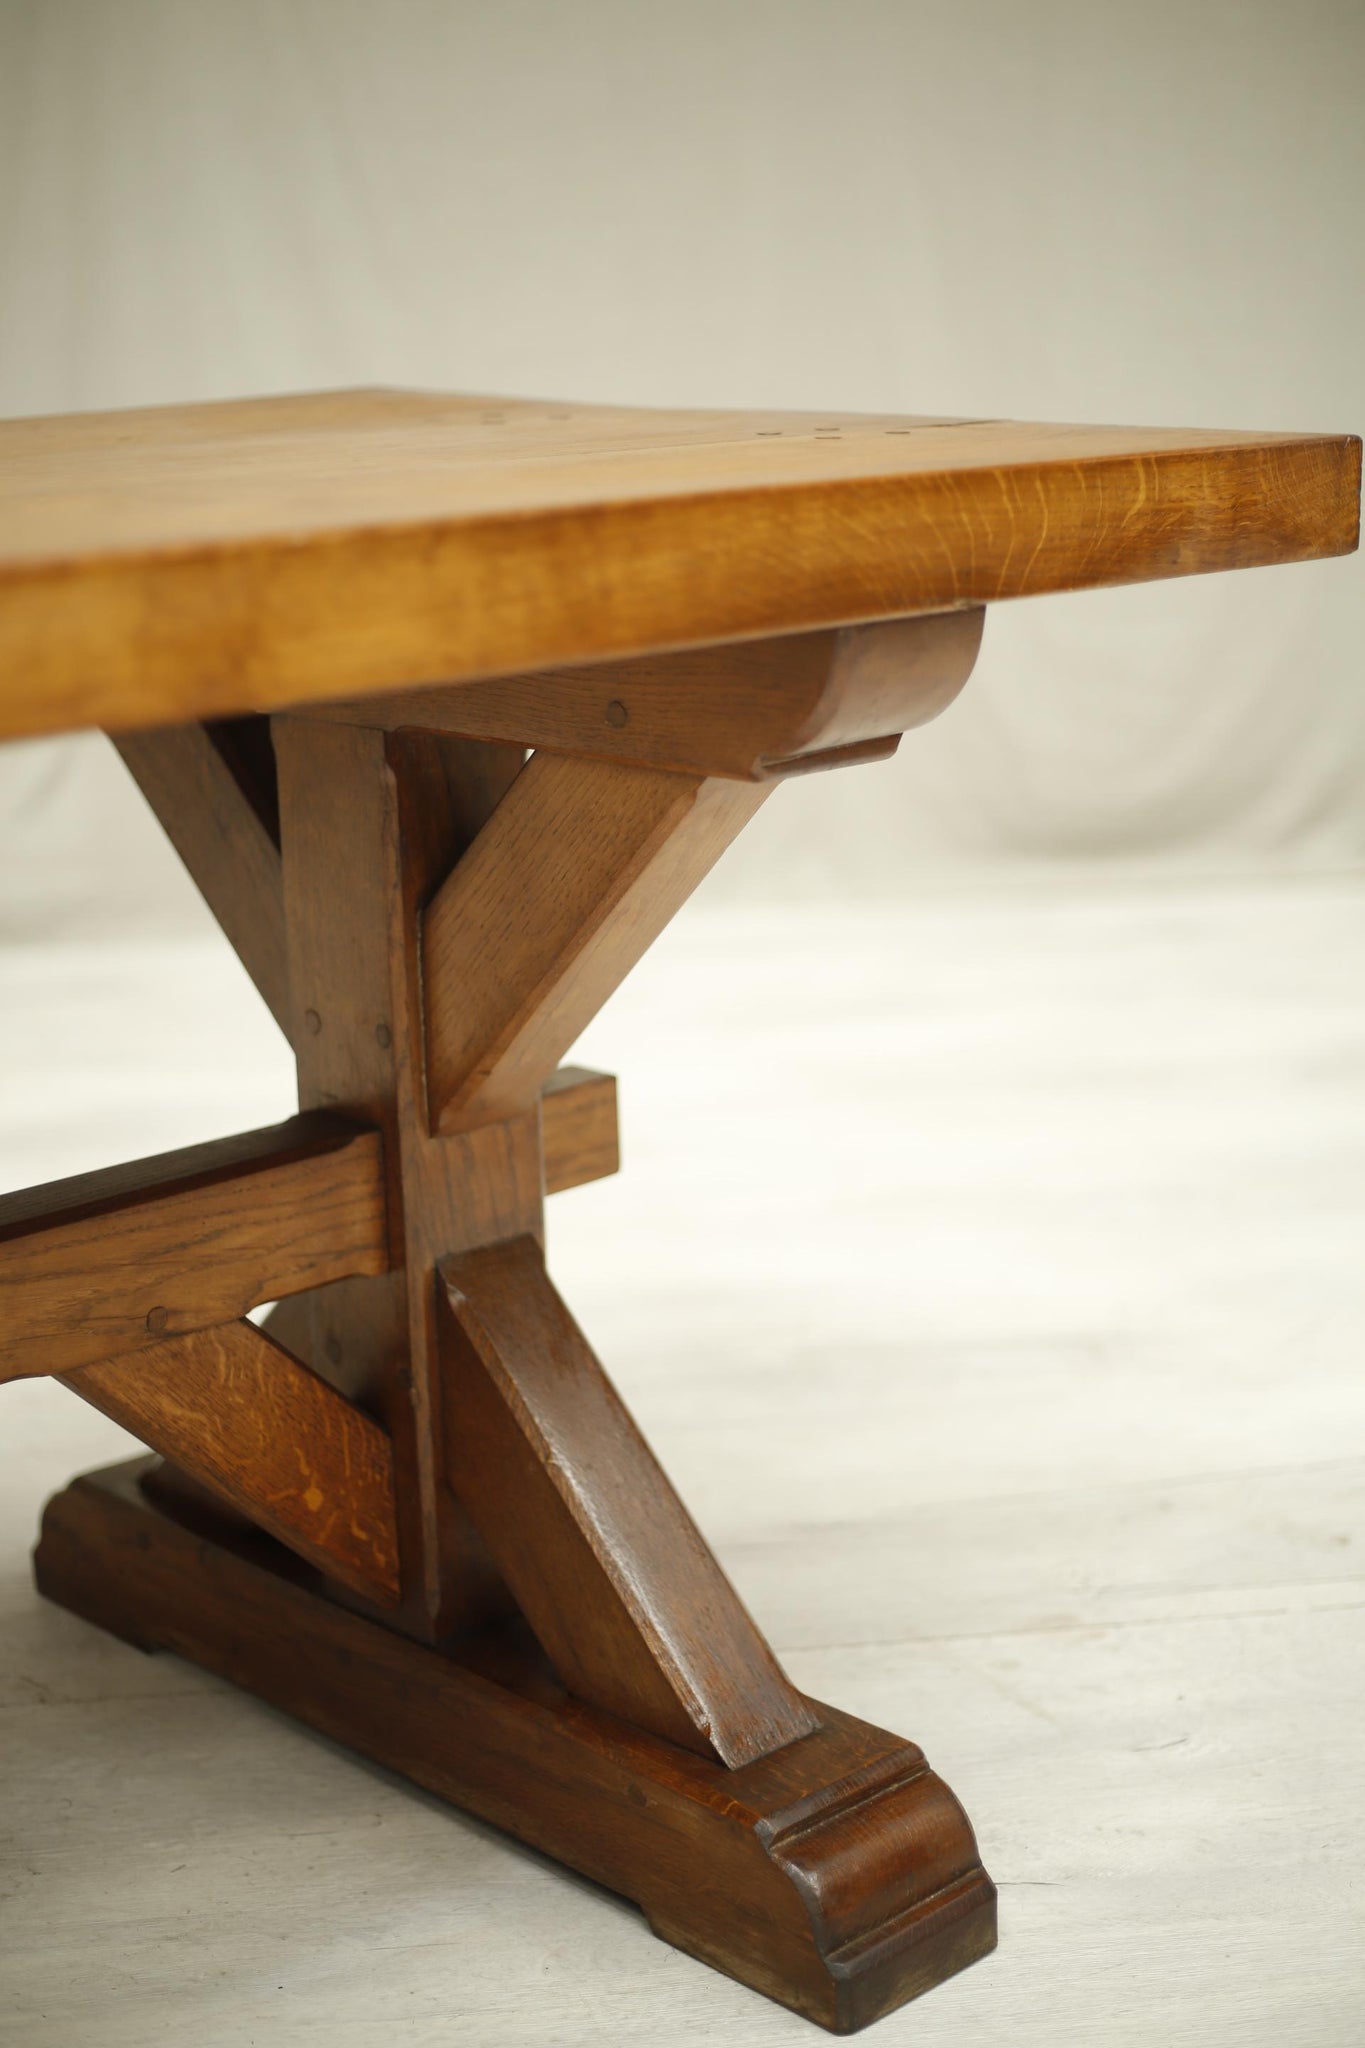 19th century Gothic X frame oak dining table